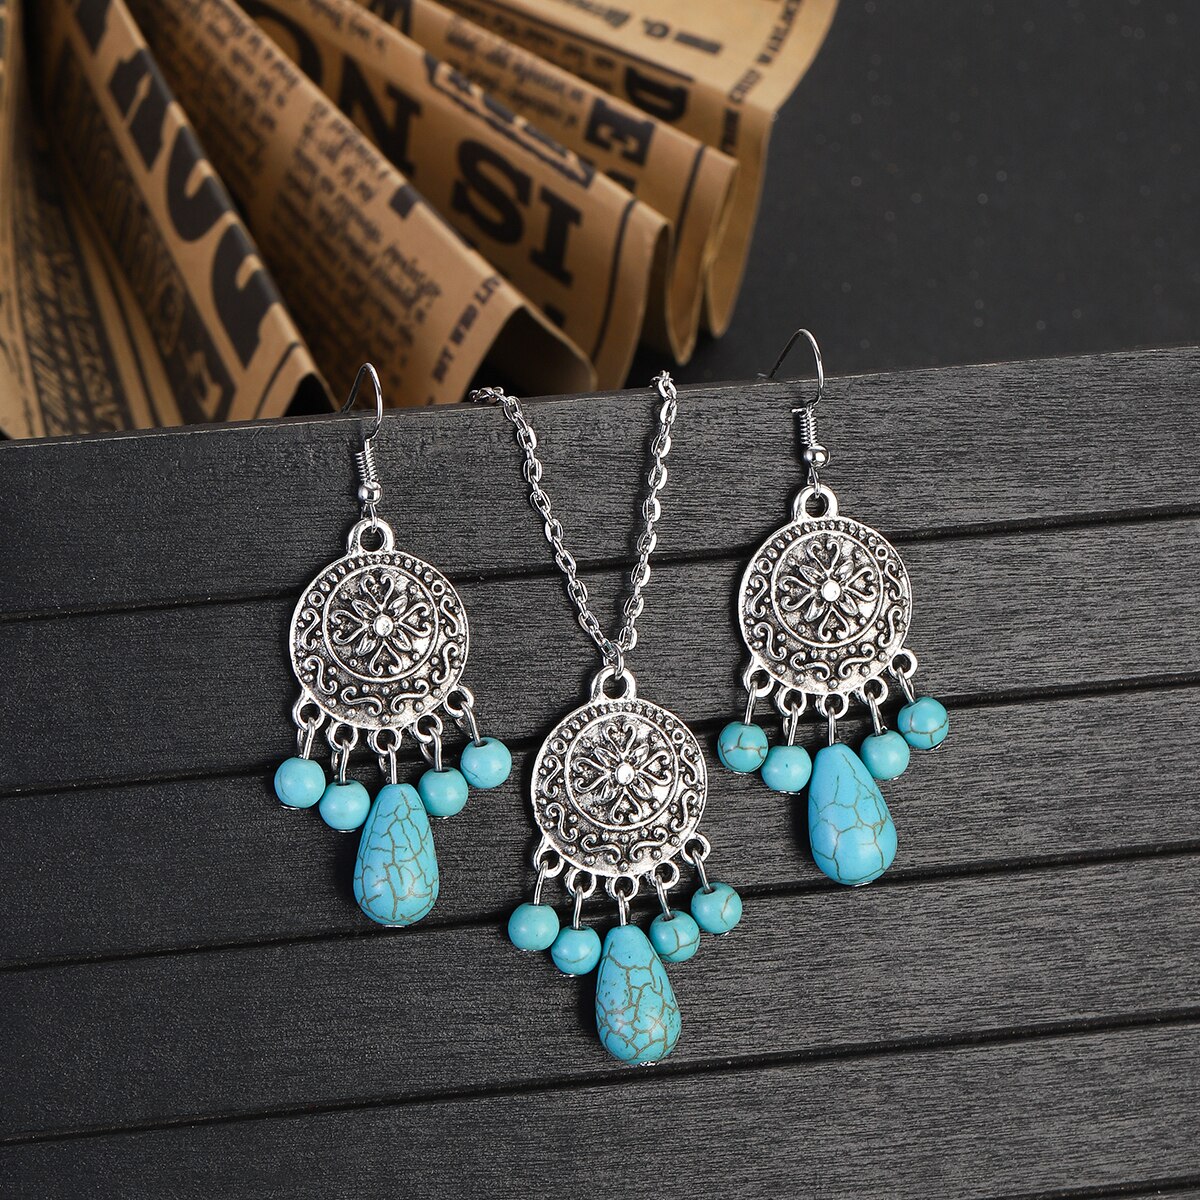 Ethnic-Boho-Blue-Stone-Tassel-Jewelry-Set-Charm-Ladies-Vintage-Jewelry-Silver-Color-Hollow-Flower-Ch-1005005134002231-12